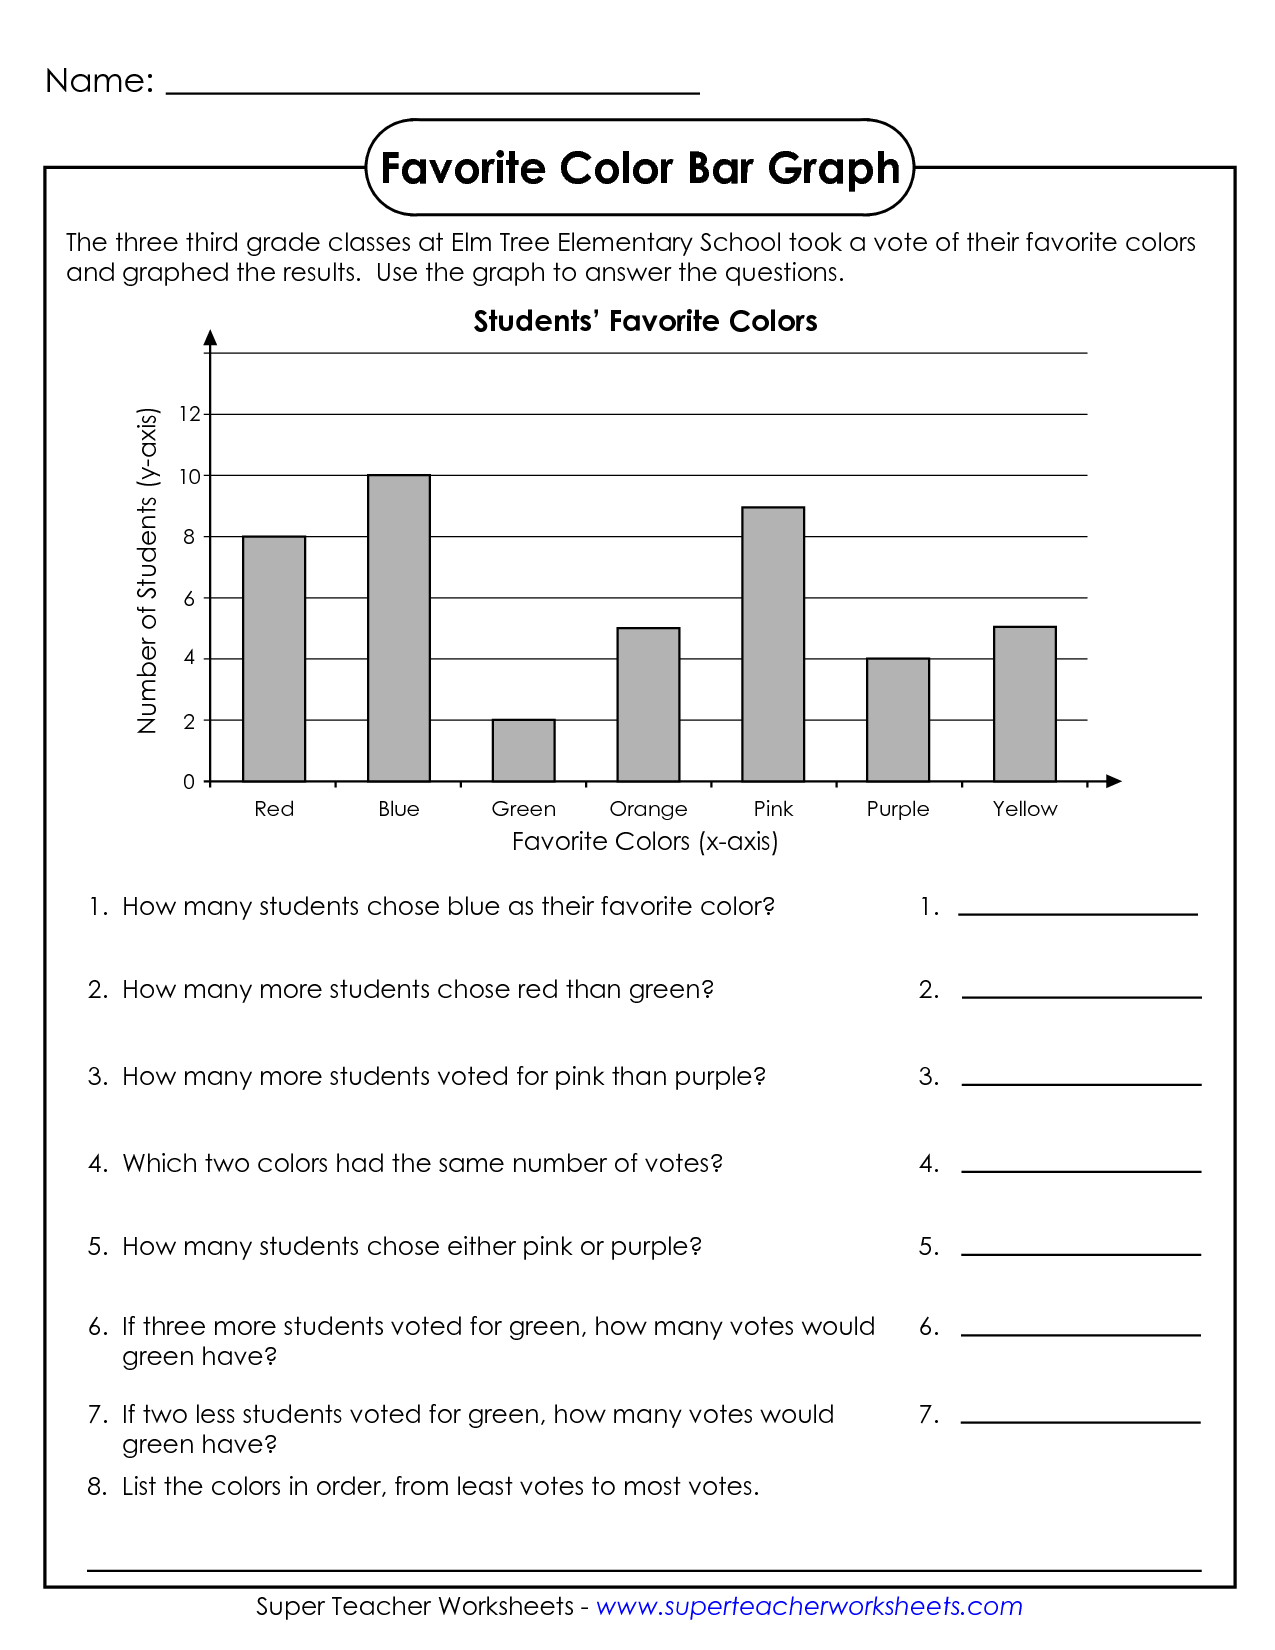 Math Worksheets For 3Rd Graders | Name Favorite Color Bar Graph The | Free Printable Bar Graph Worksheets For 3Rd Grade